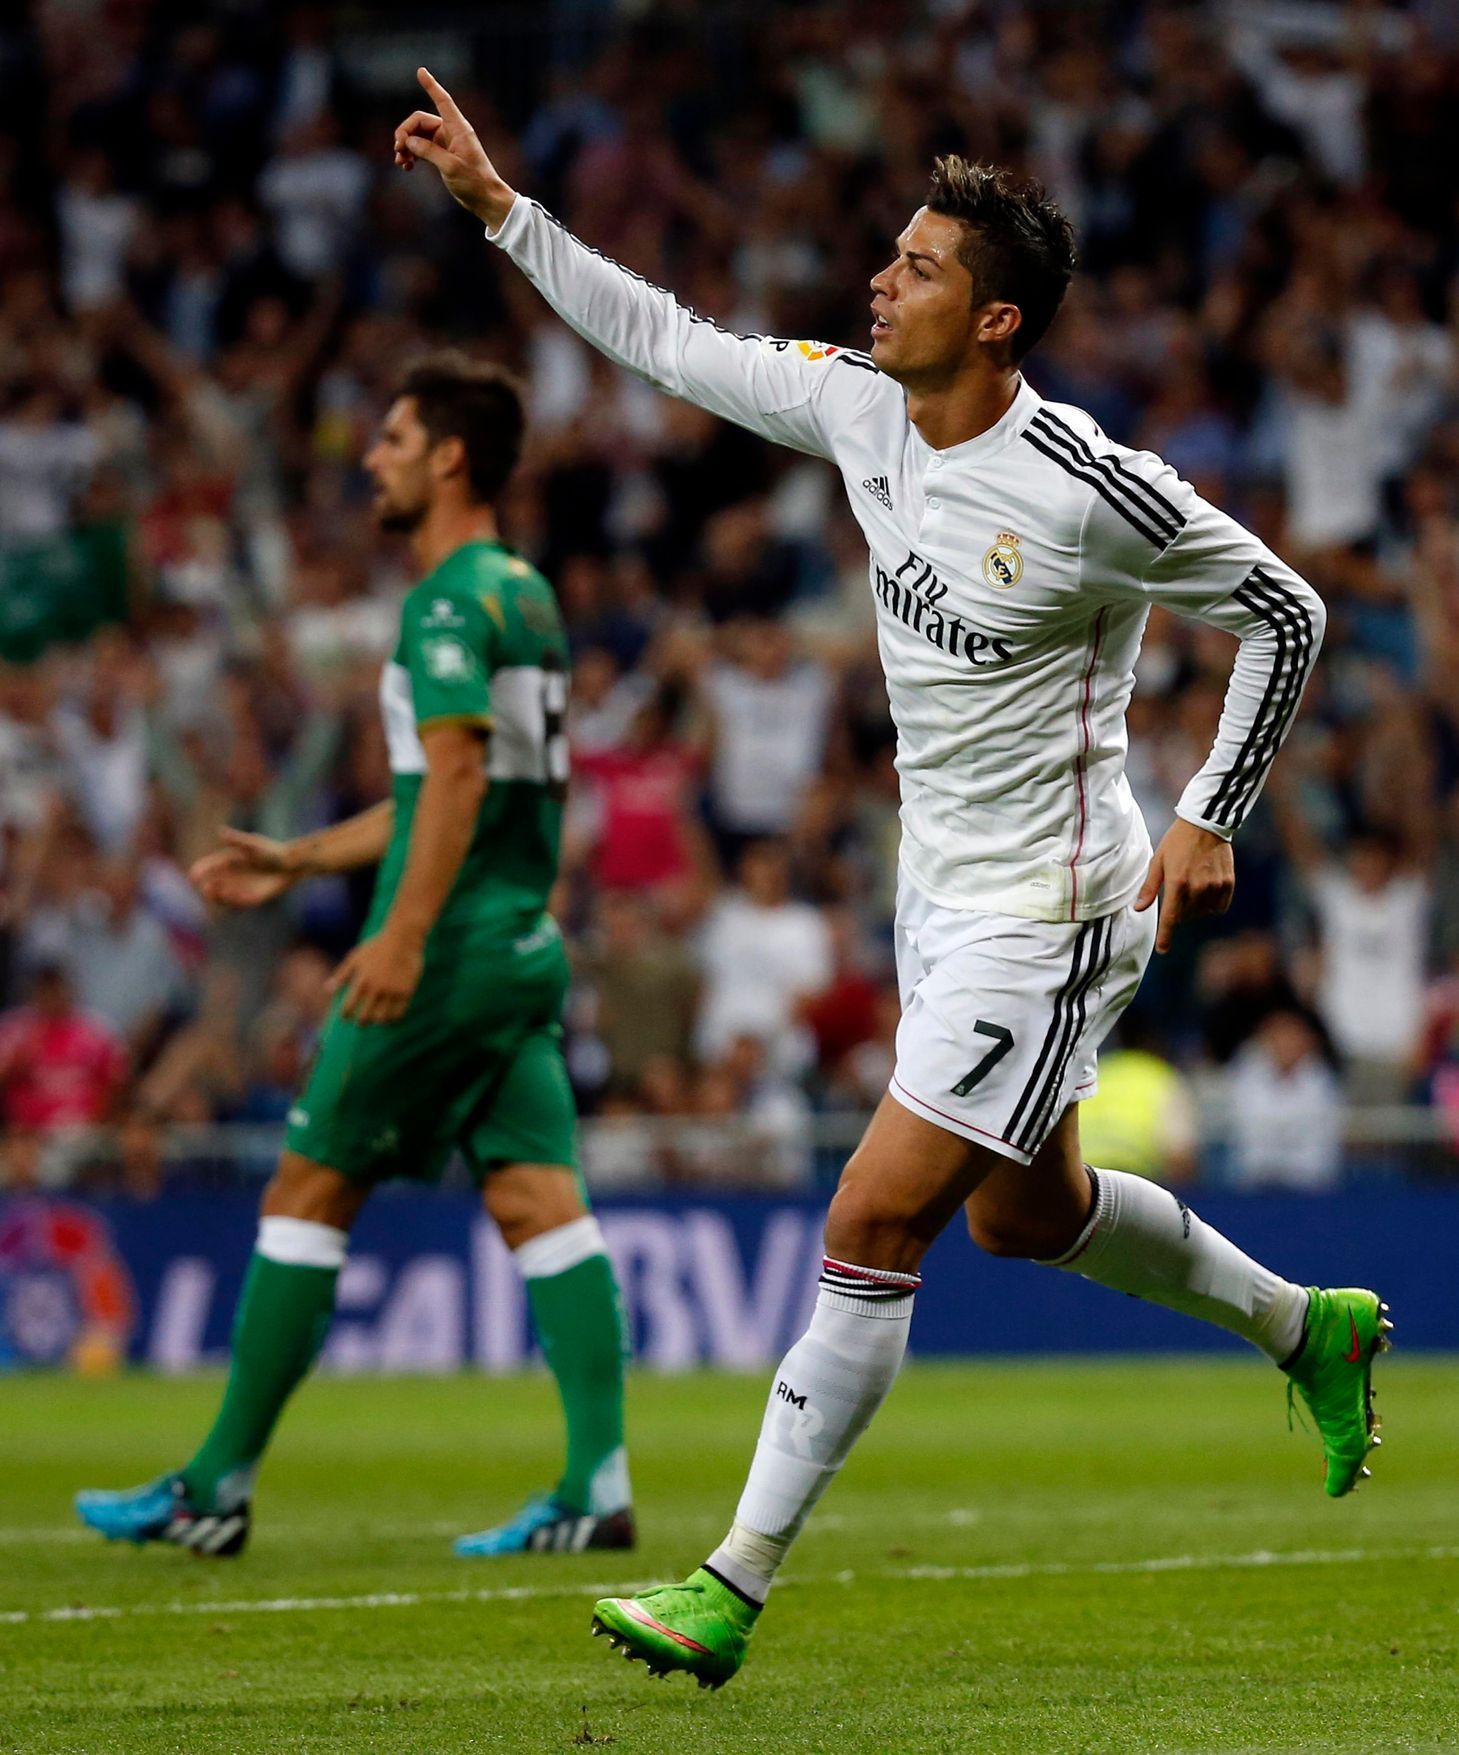 Real Madrid's Ronaldo celebrates after scoring his second goal against Elche during their Spanish first division soccer match in Madrid